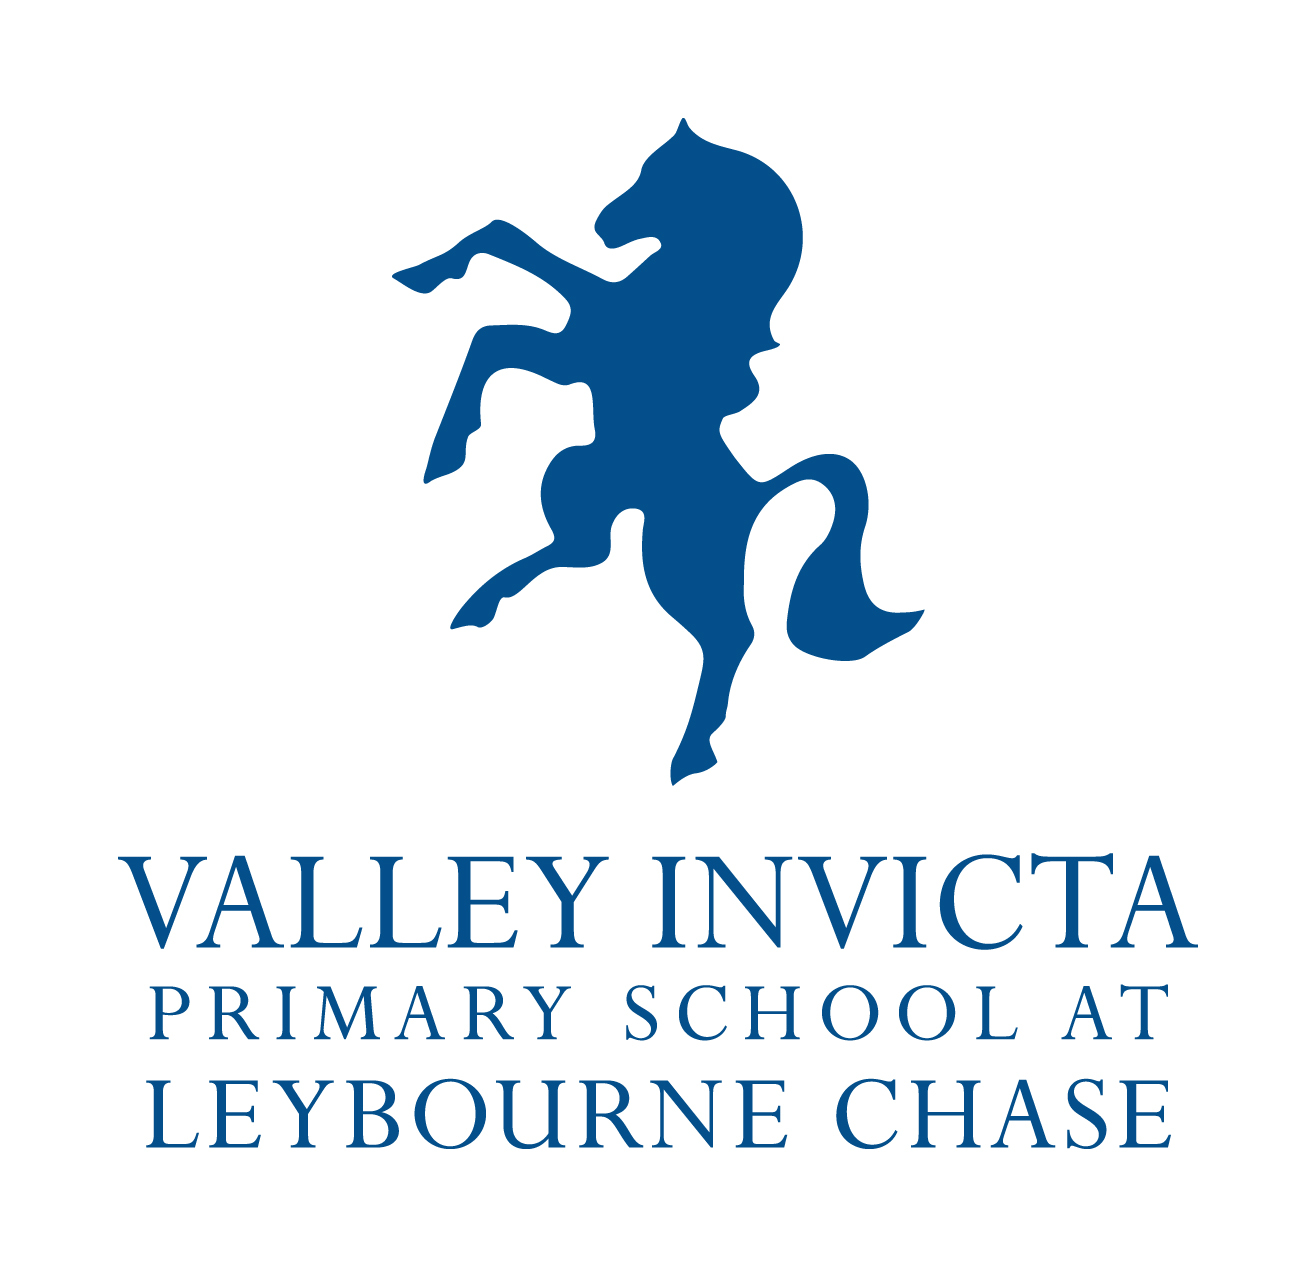 Valley Invicta Primary School at Leybourne Chase